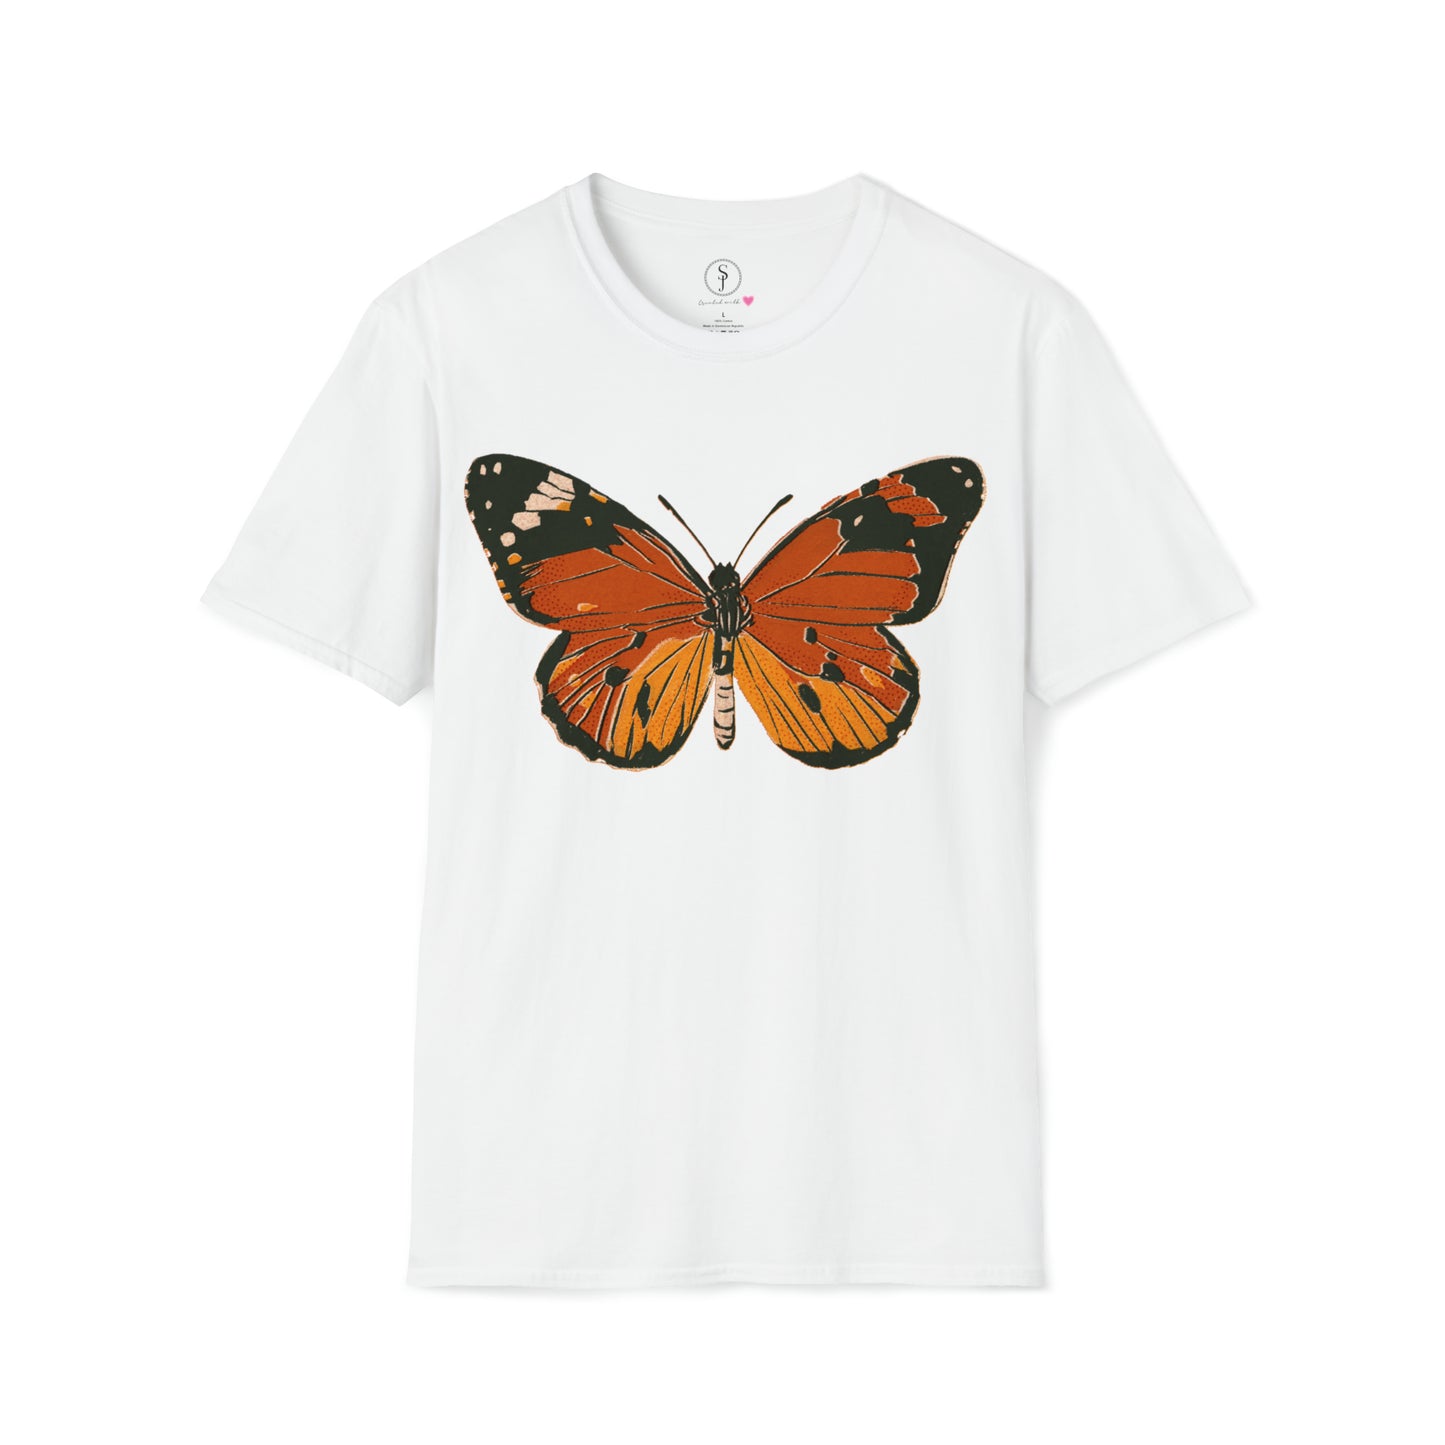 Monarch Butterfly Short Sleeve T-Shirt (Available In Other Colors)